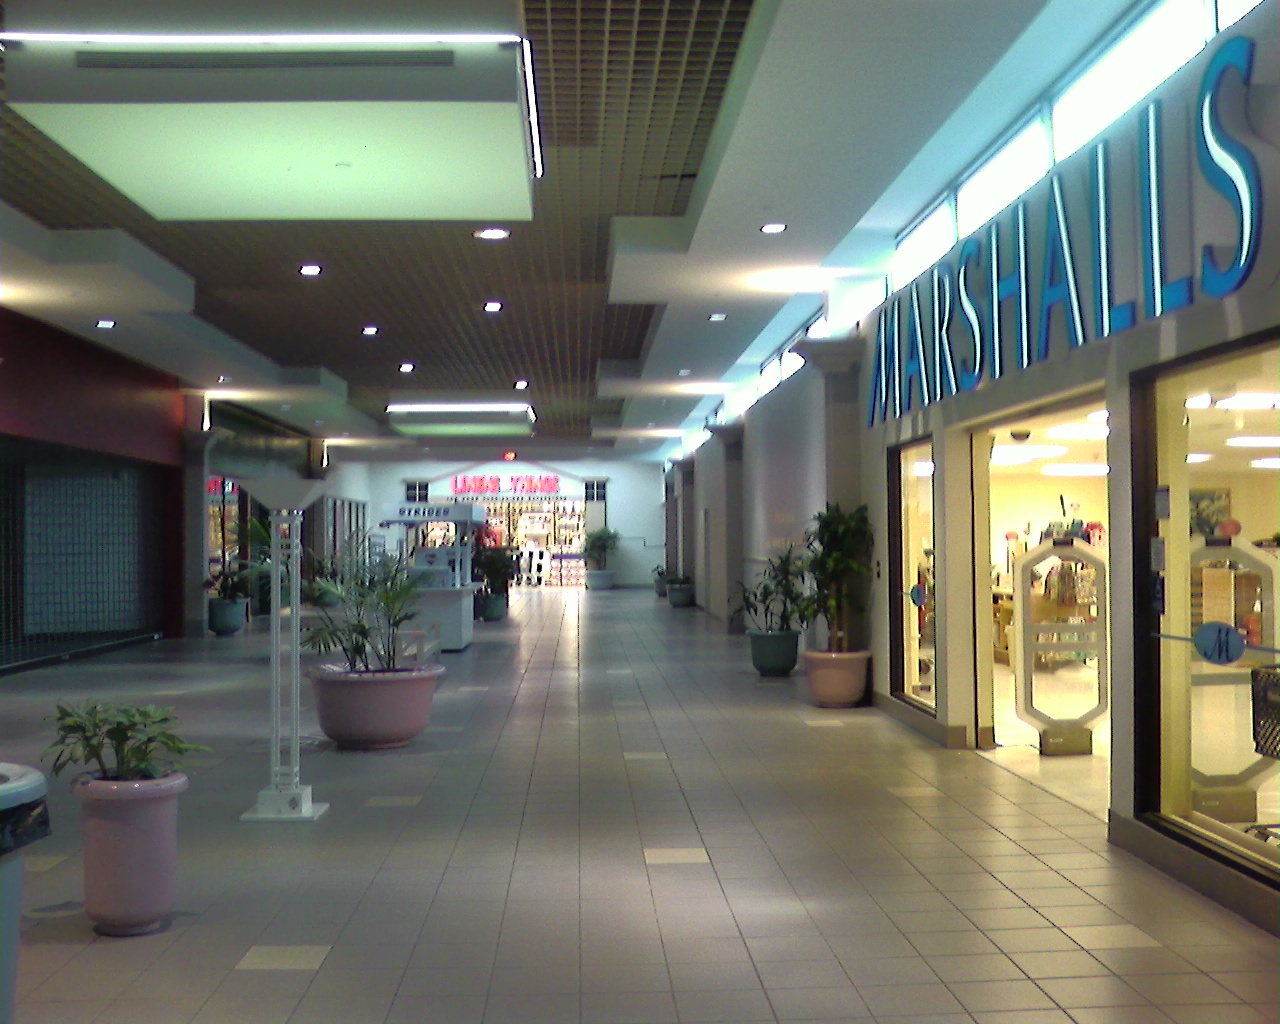 Labelscar: The Retail History BlogBedford Mall; Bedford, New Hampshire - Labelscar: The Retail ...